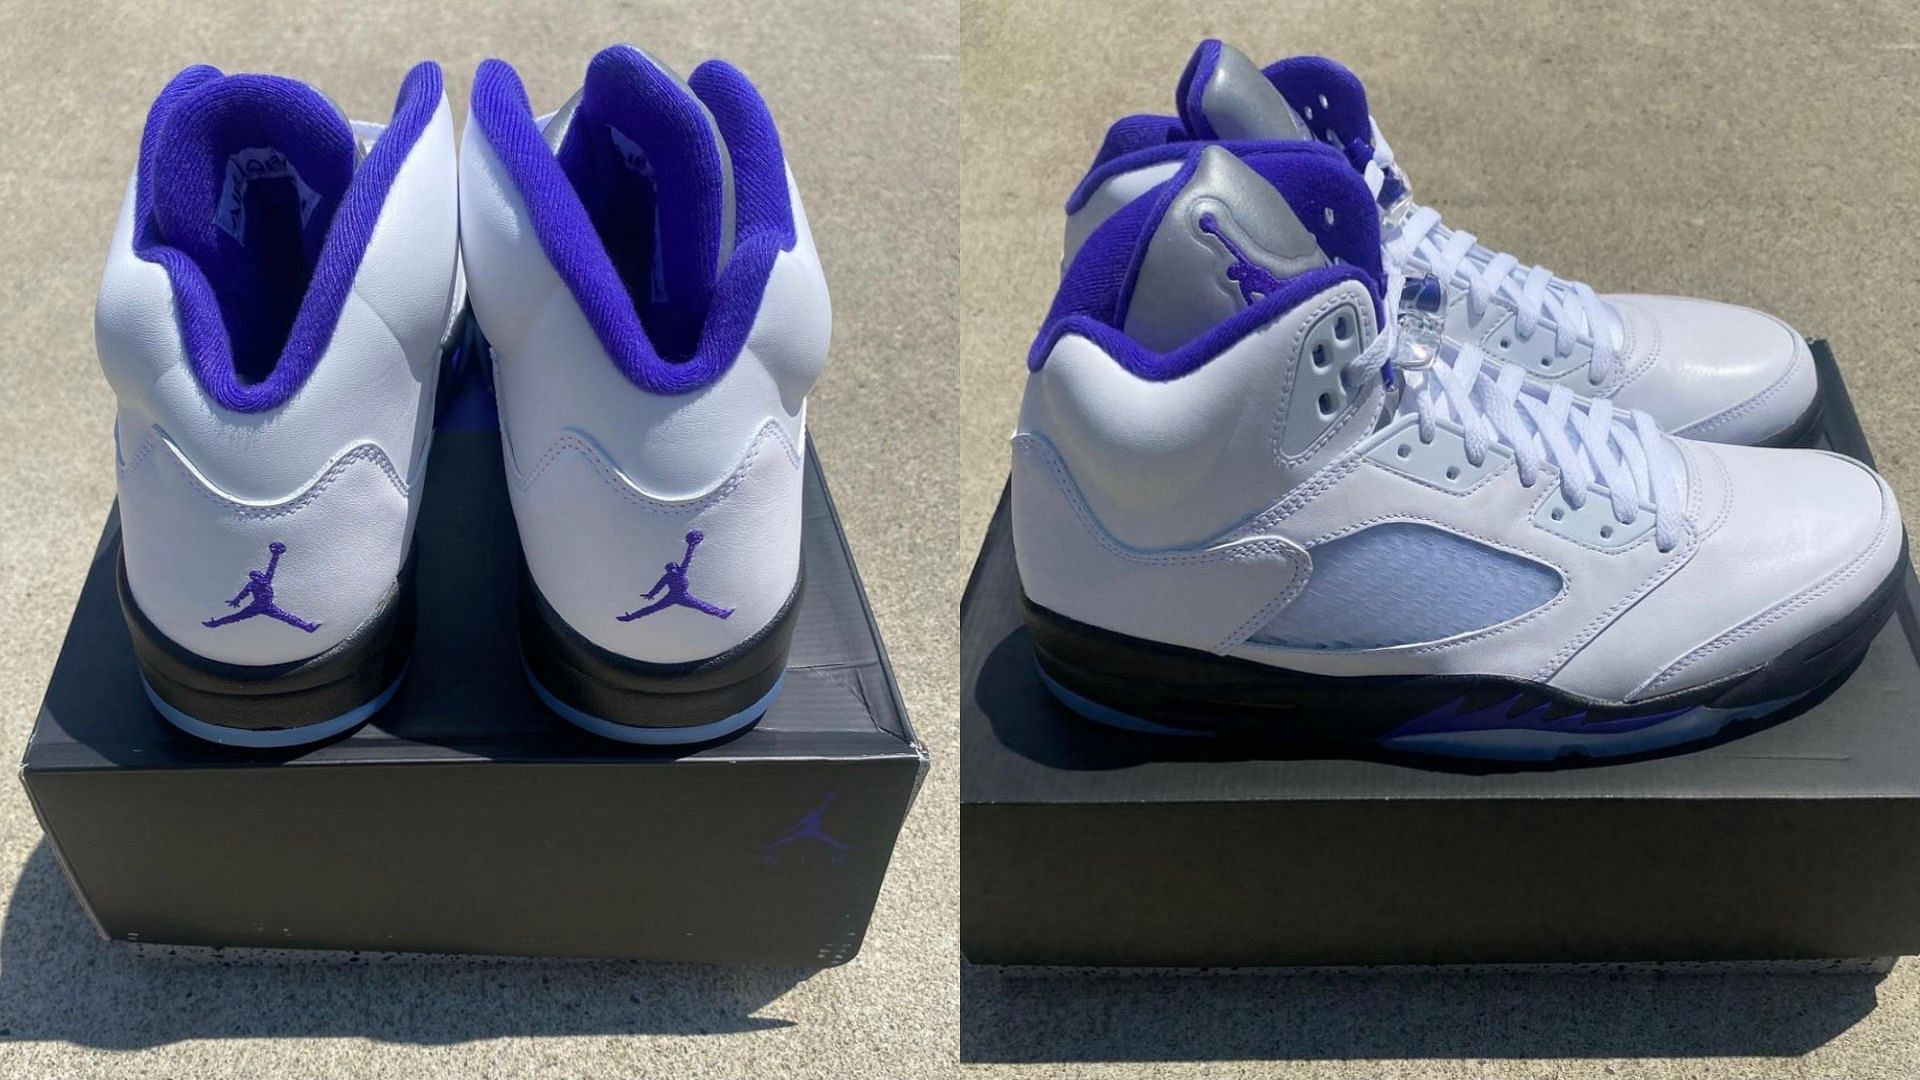 Take a closer look at the AJ5 Concord shoes (Image via Twitter/@uptod4te)